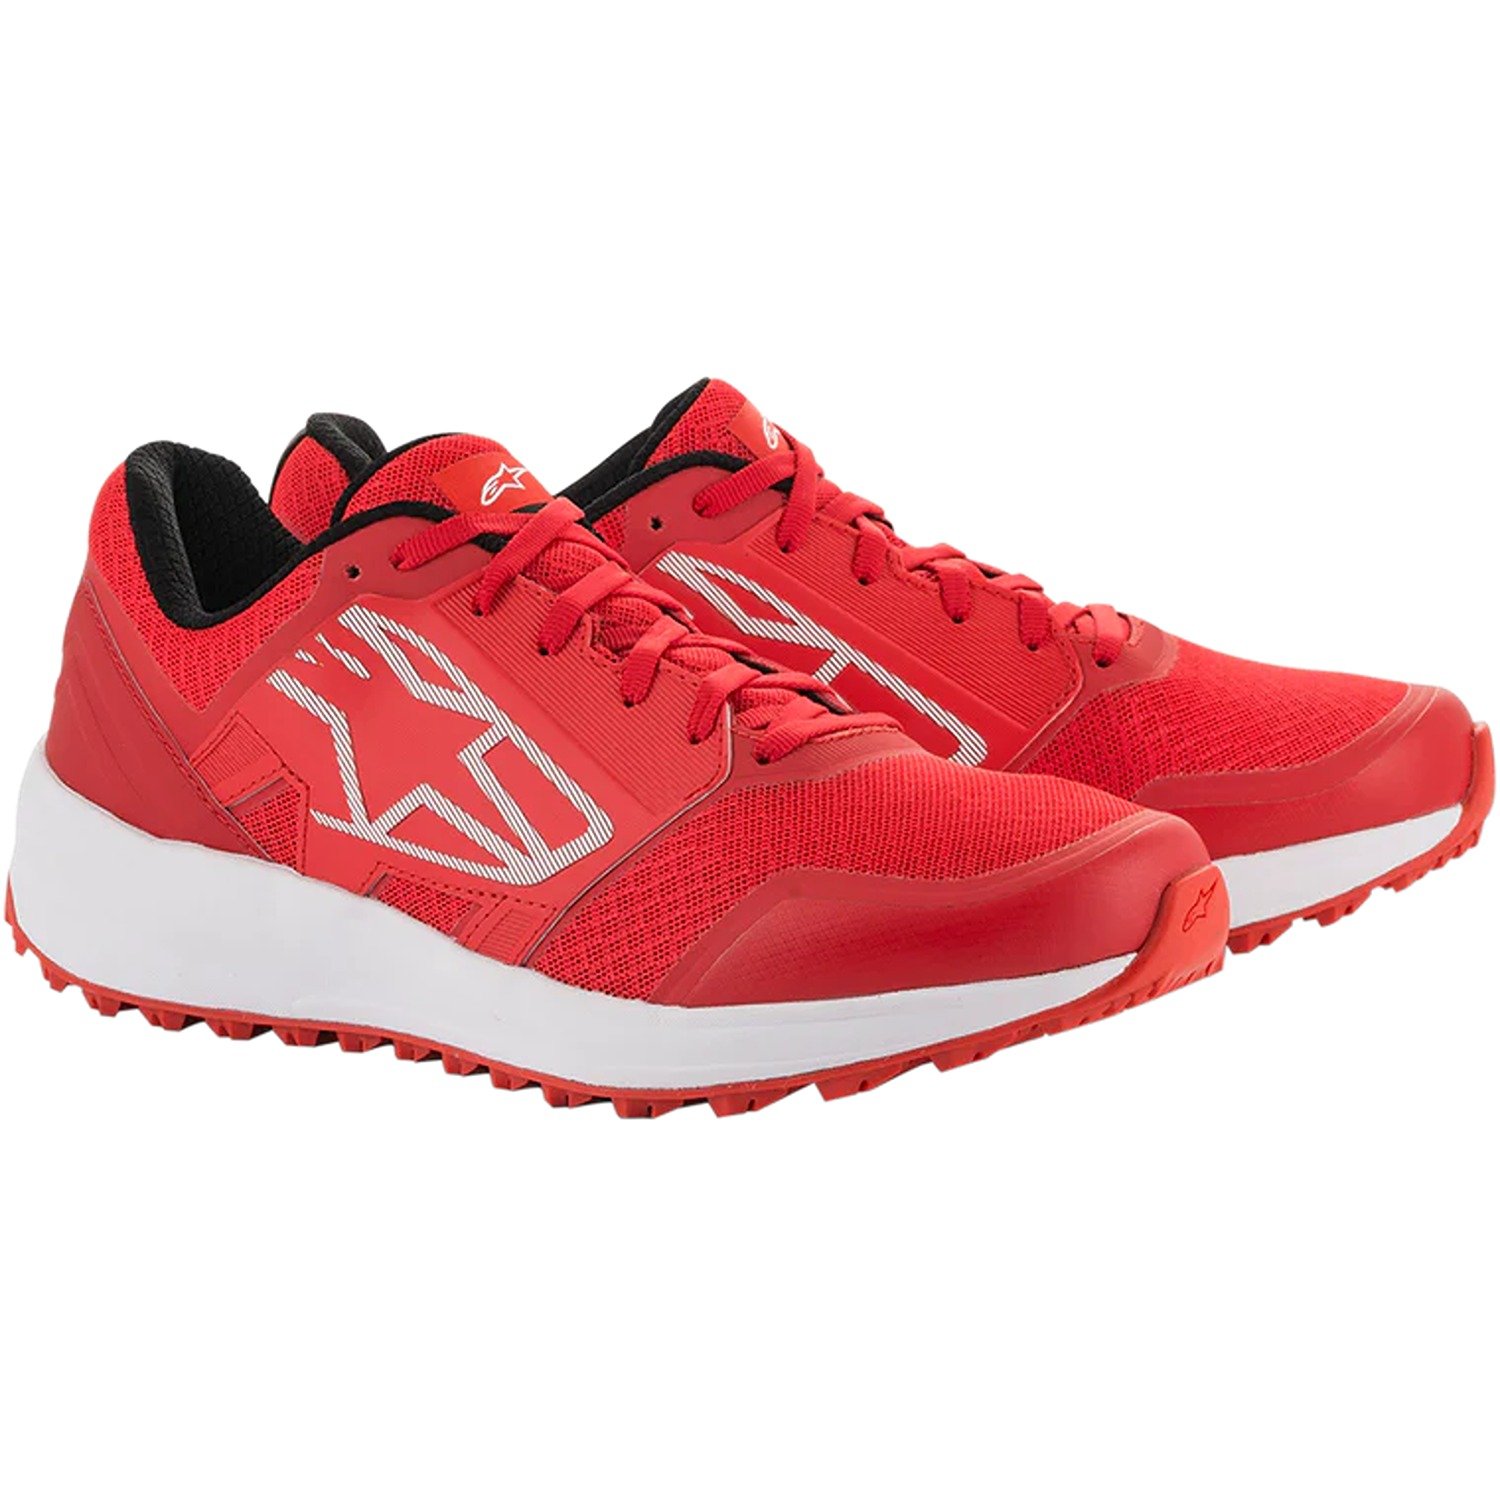 Image of Alpinestars Meta Trail Shoes Red White Size US 8 ID 8059175107719